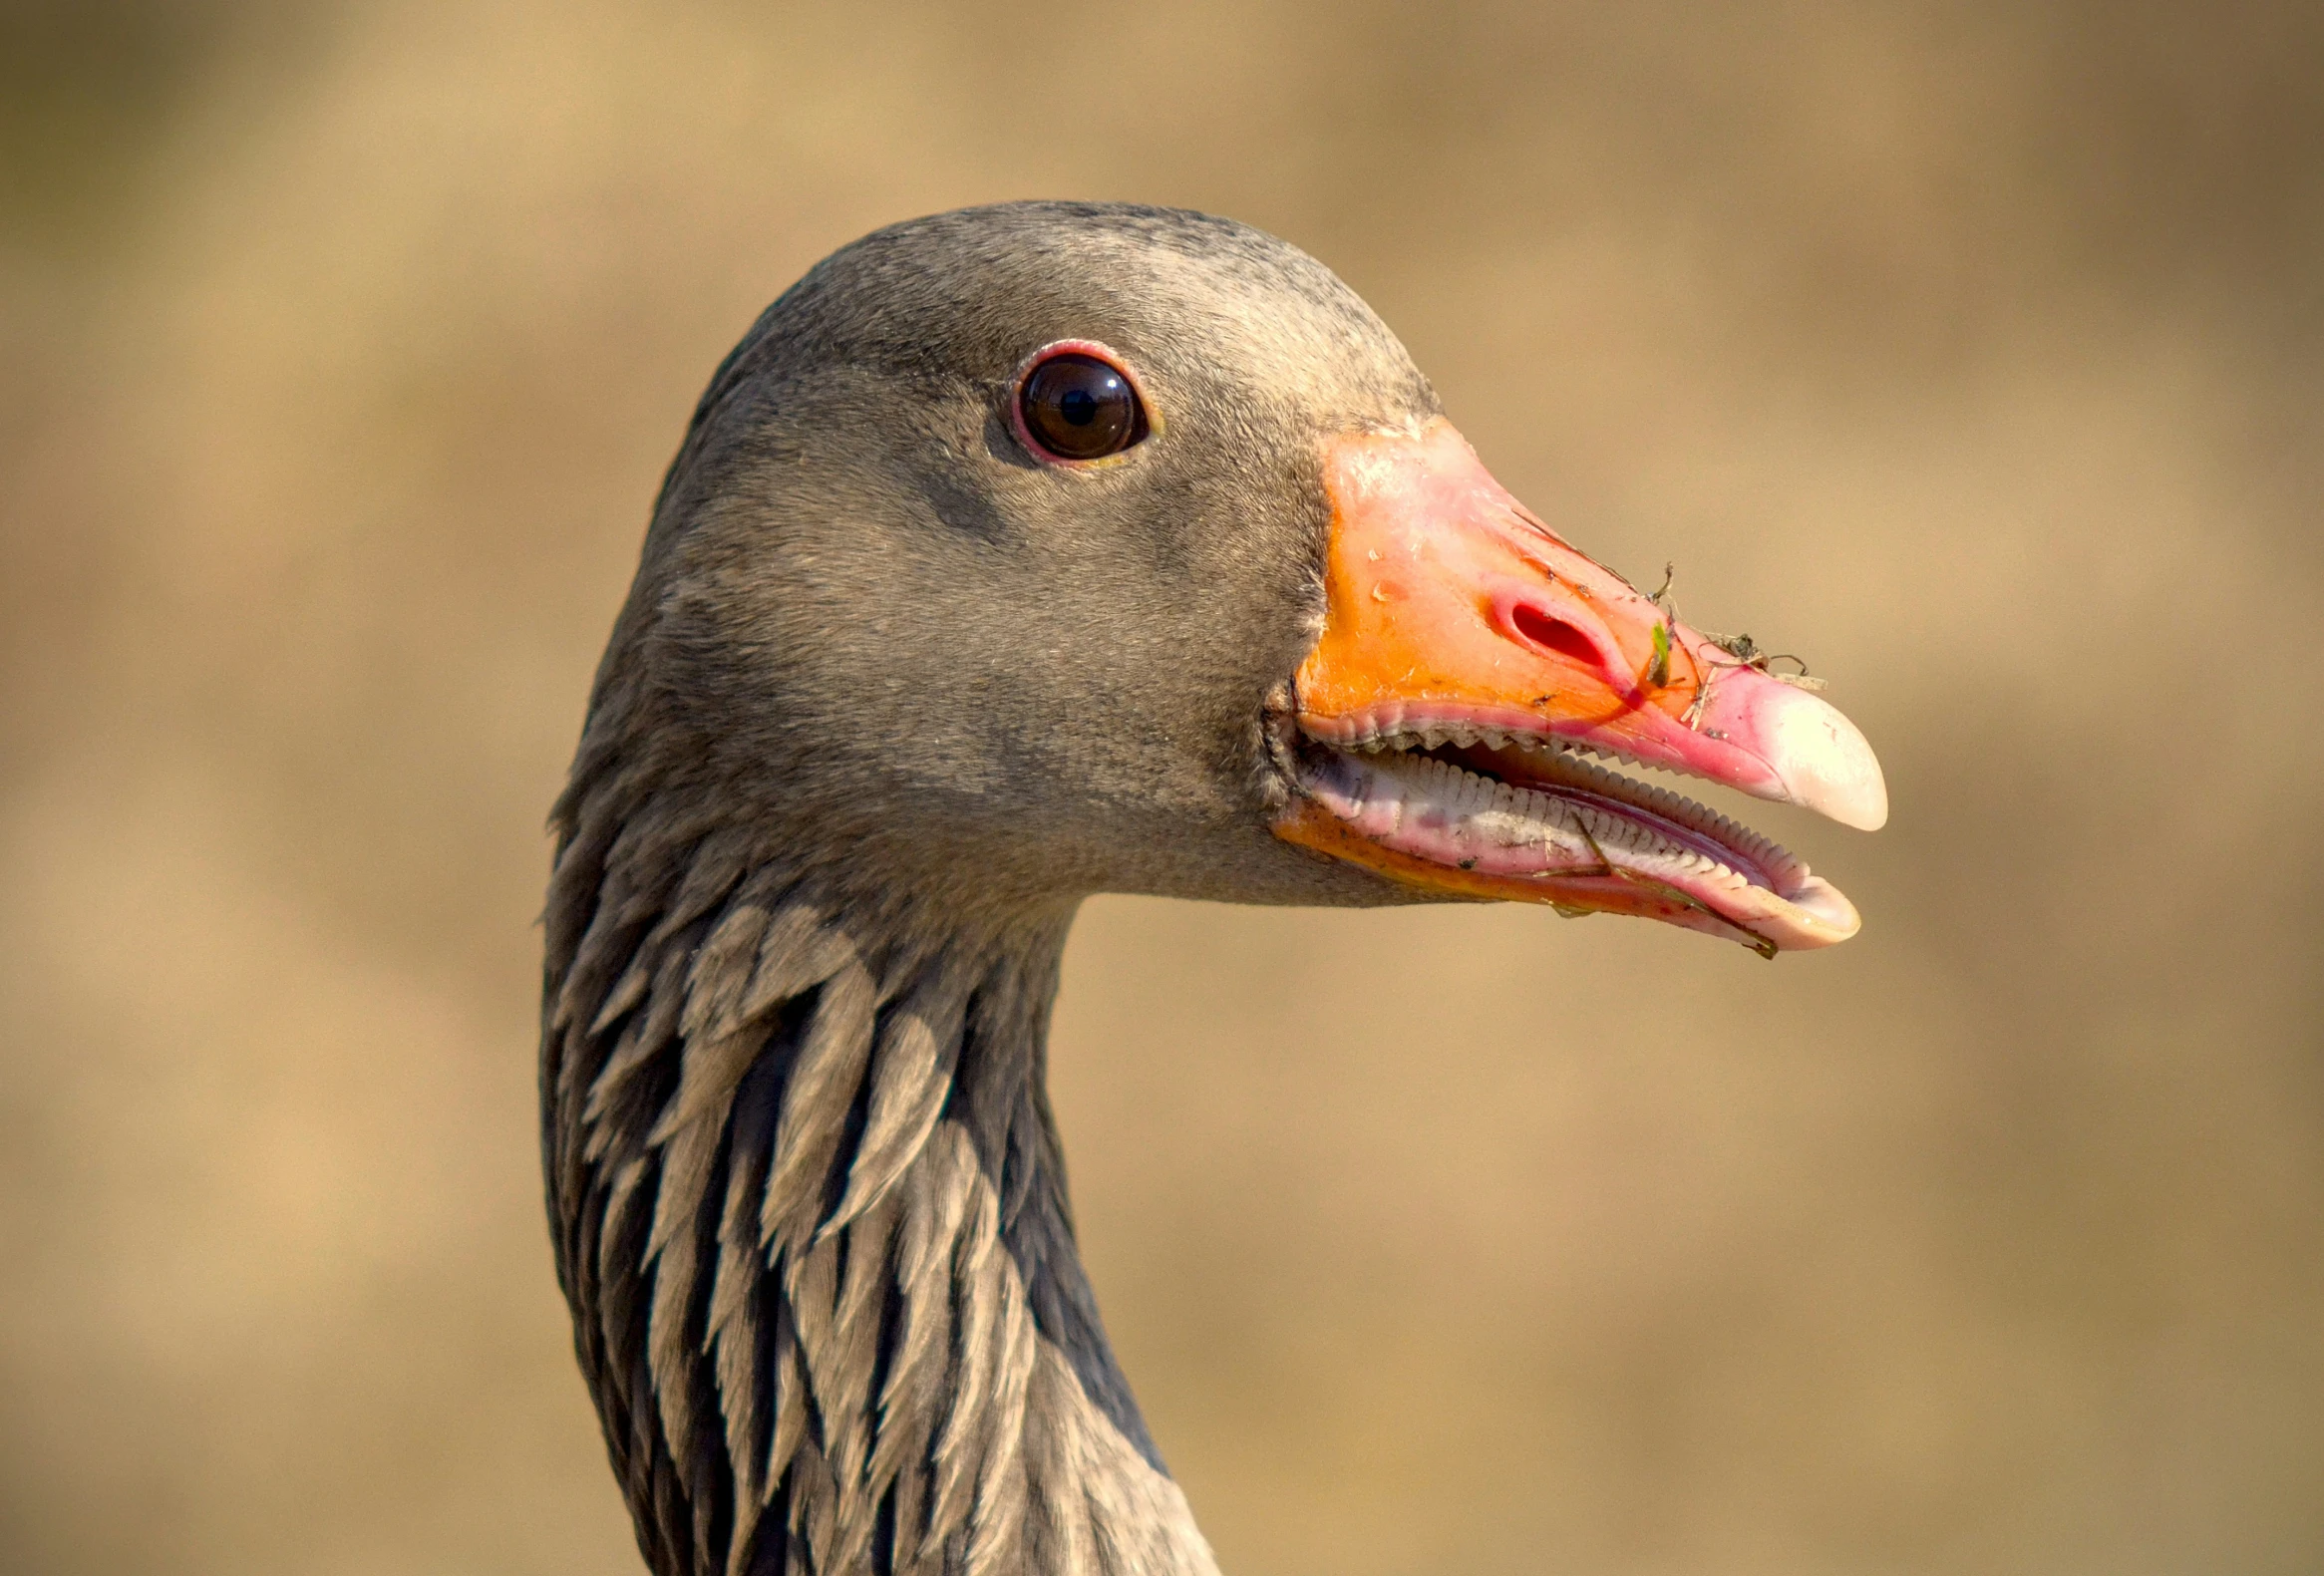 a duck is shown with orange beak and long legs